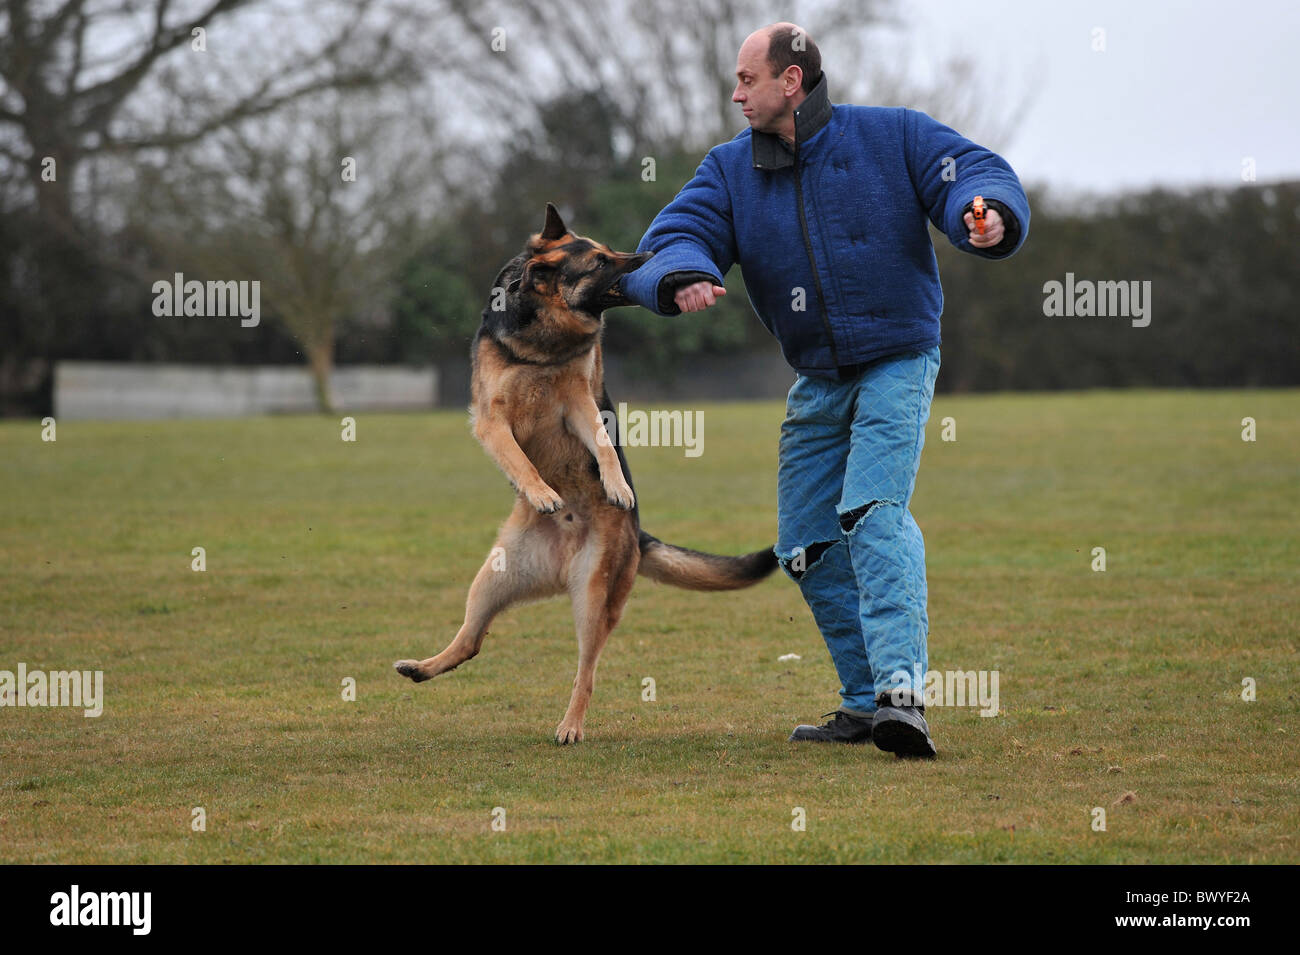 are police dogs trained to attack